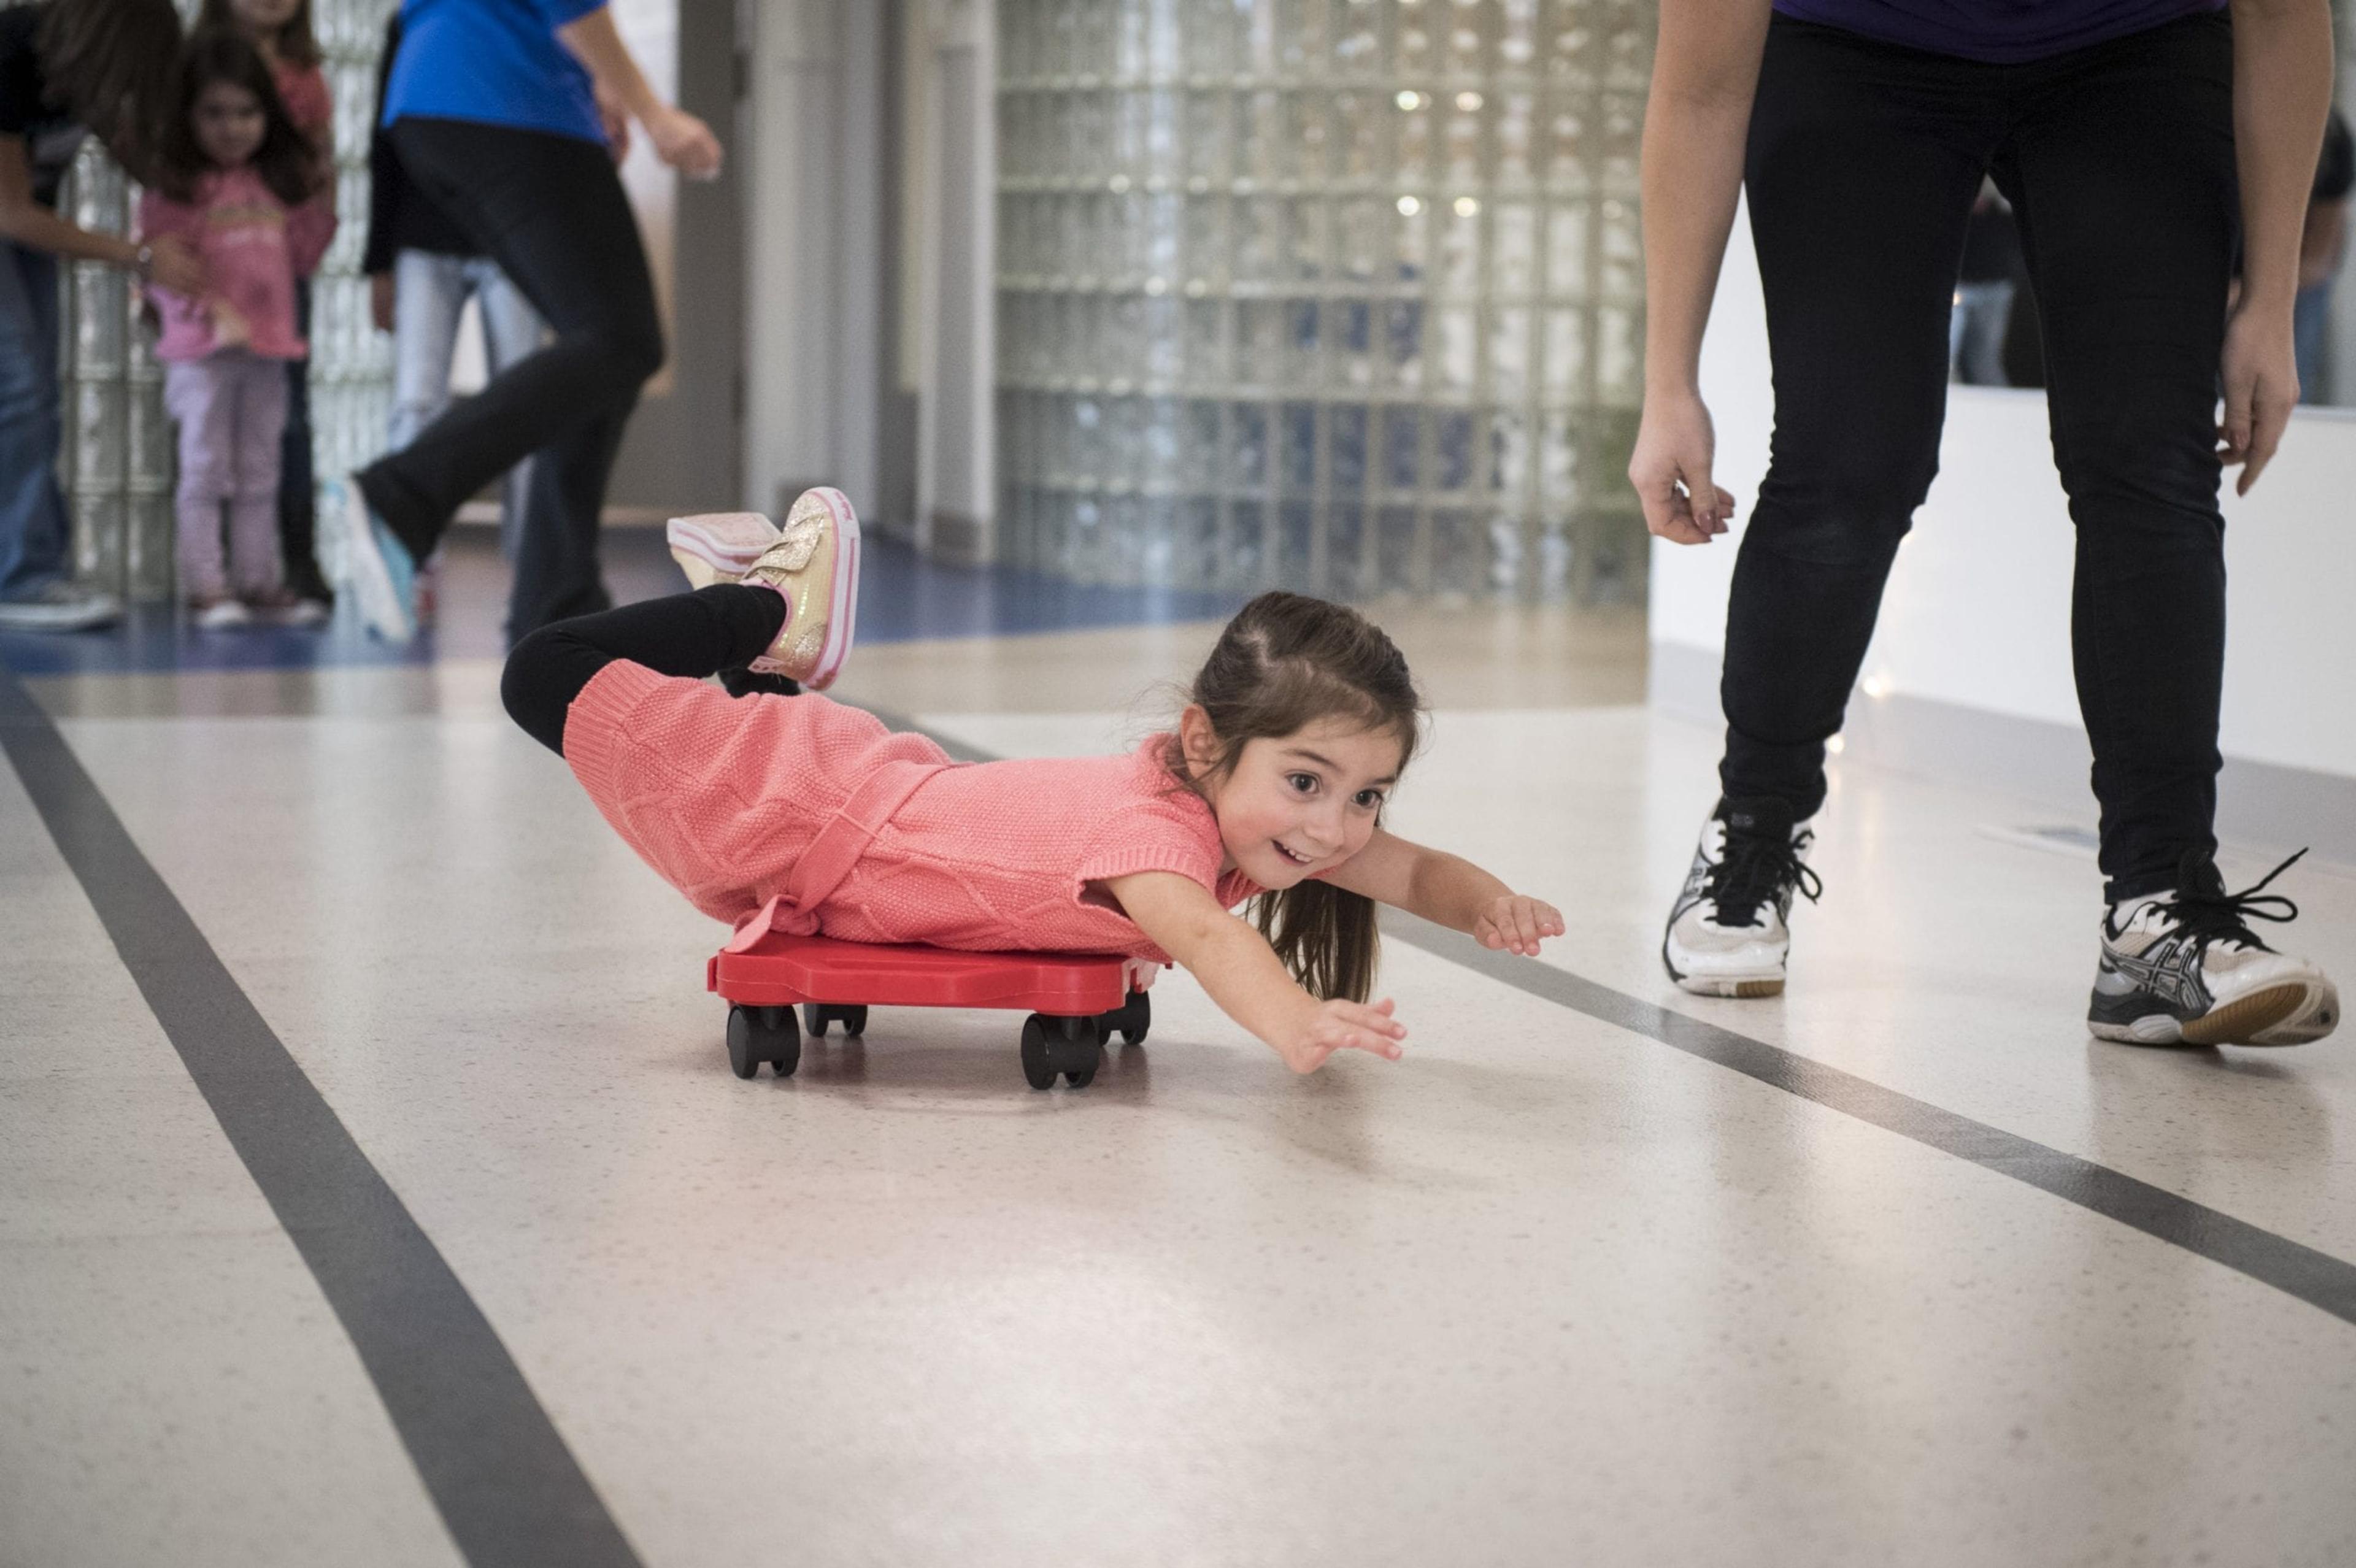 A child visiting the Children's Healing Center rides a scooter across the floor on her belly.